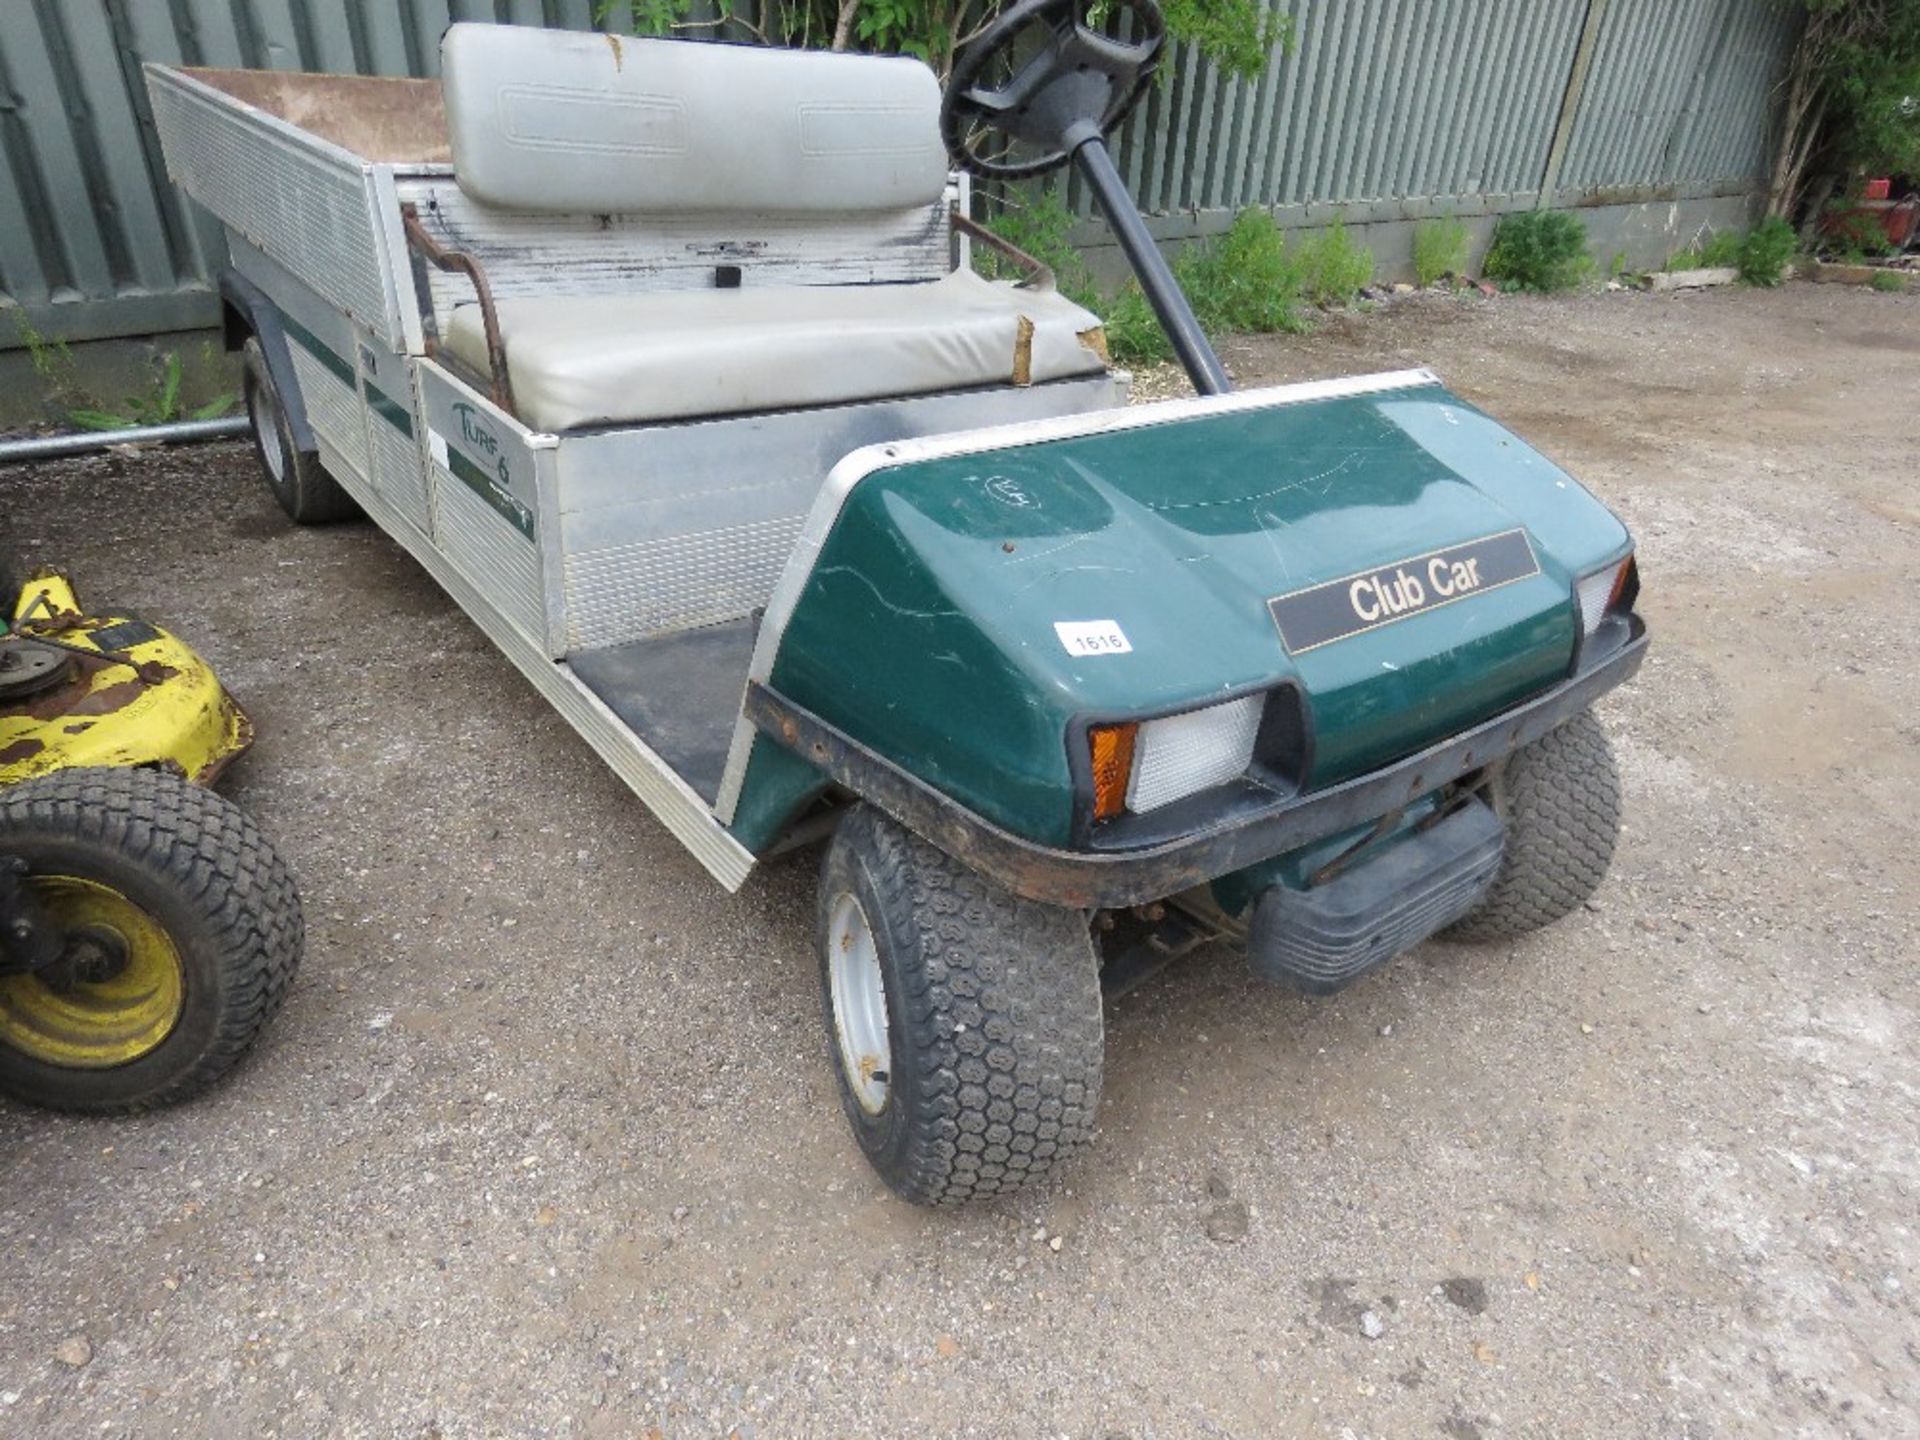 CLUBCAR CARRYALL PETROL UTILITY TRUCK. WHEN TESTED WAS SEEN TO DRIVE, STEER AND BRAKE,